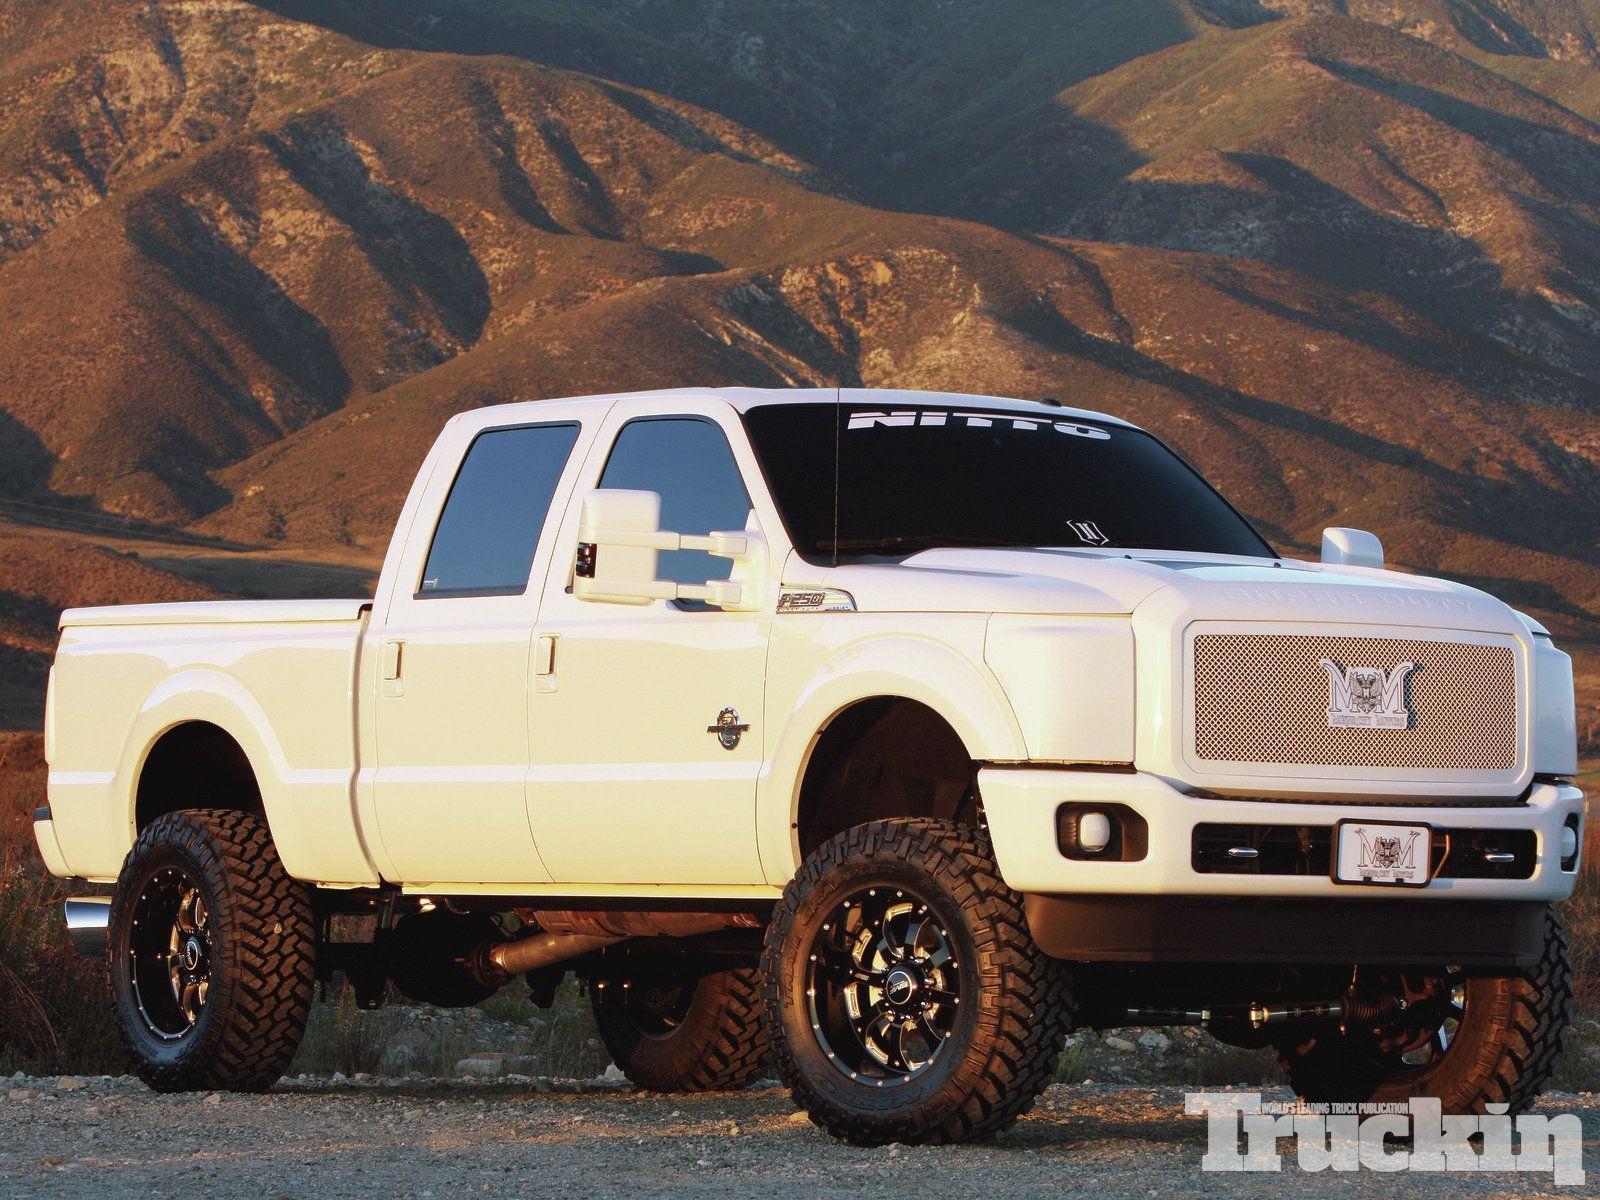 Lifted Ford Trucks appos.us